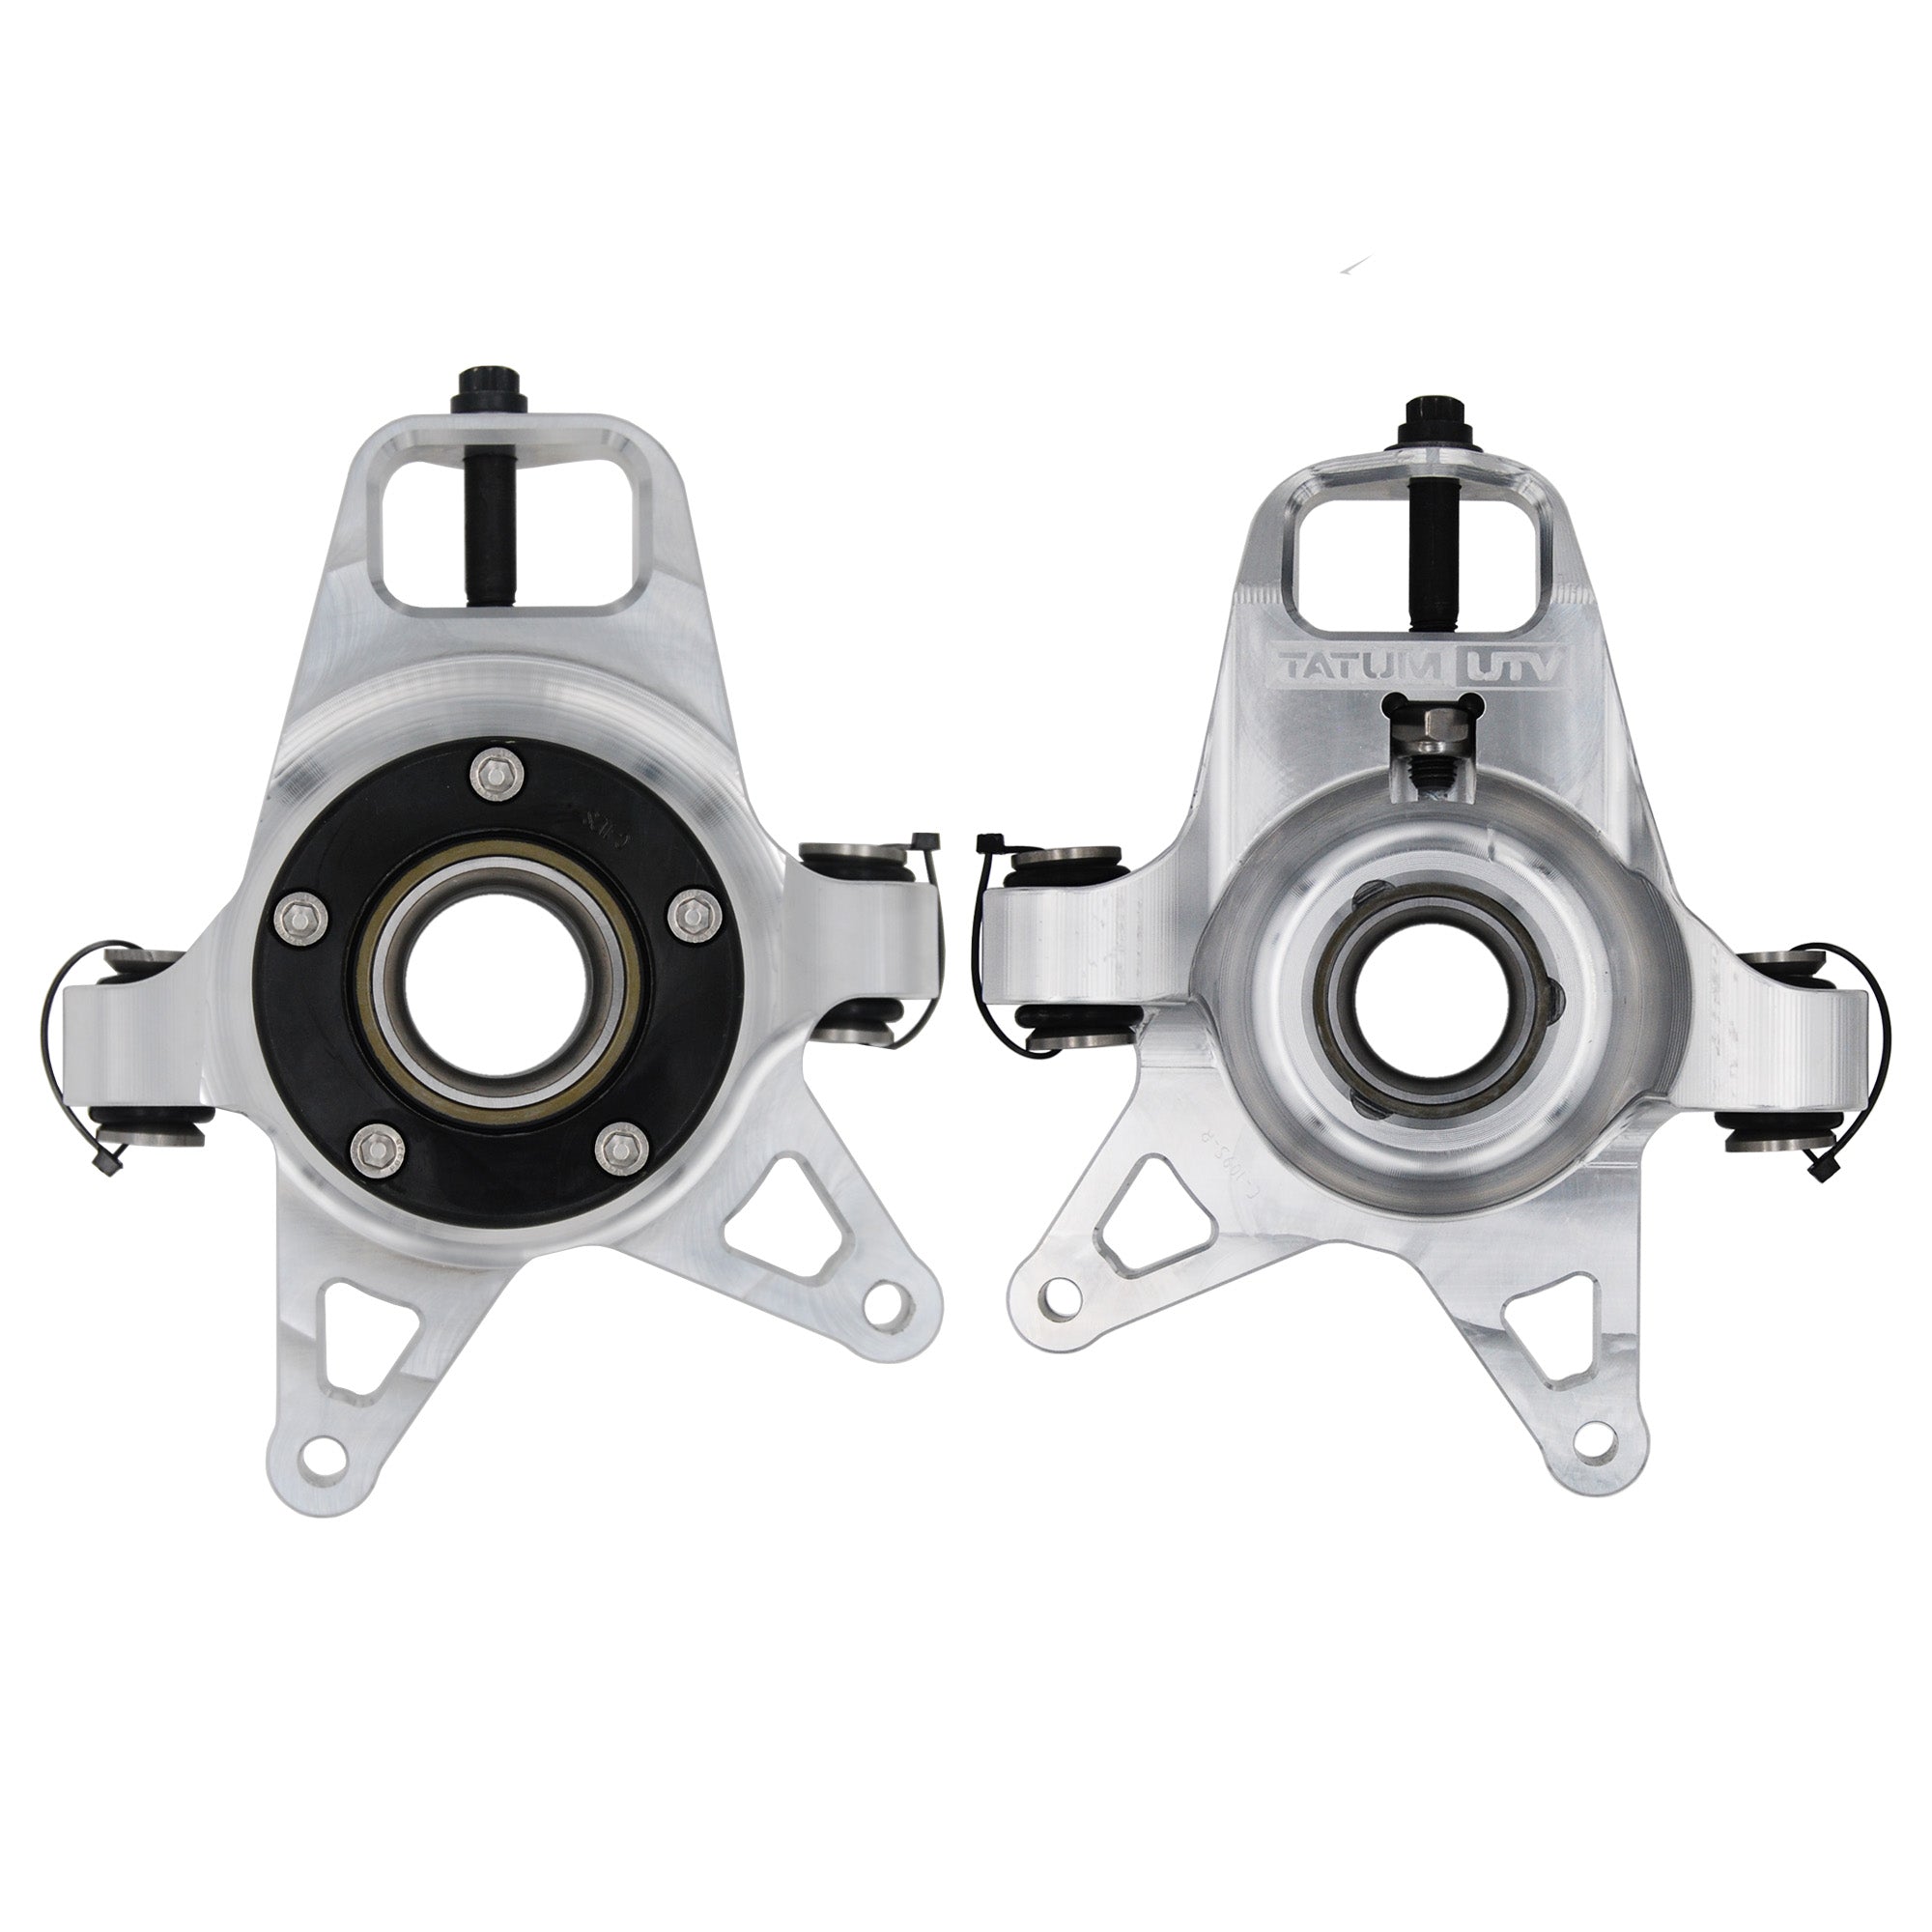 Capped Can-Am X3 Billet Rear Knuckle/Spindle Set